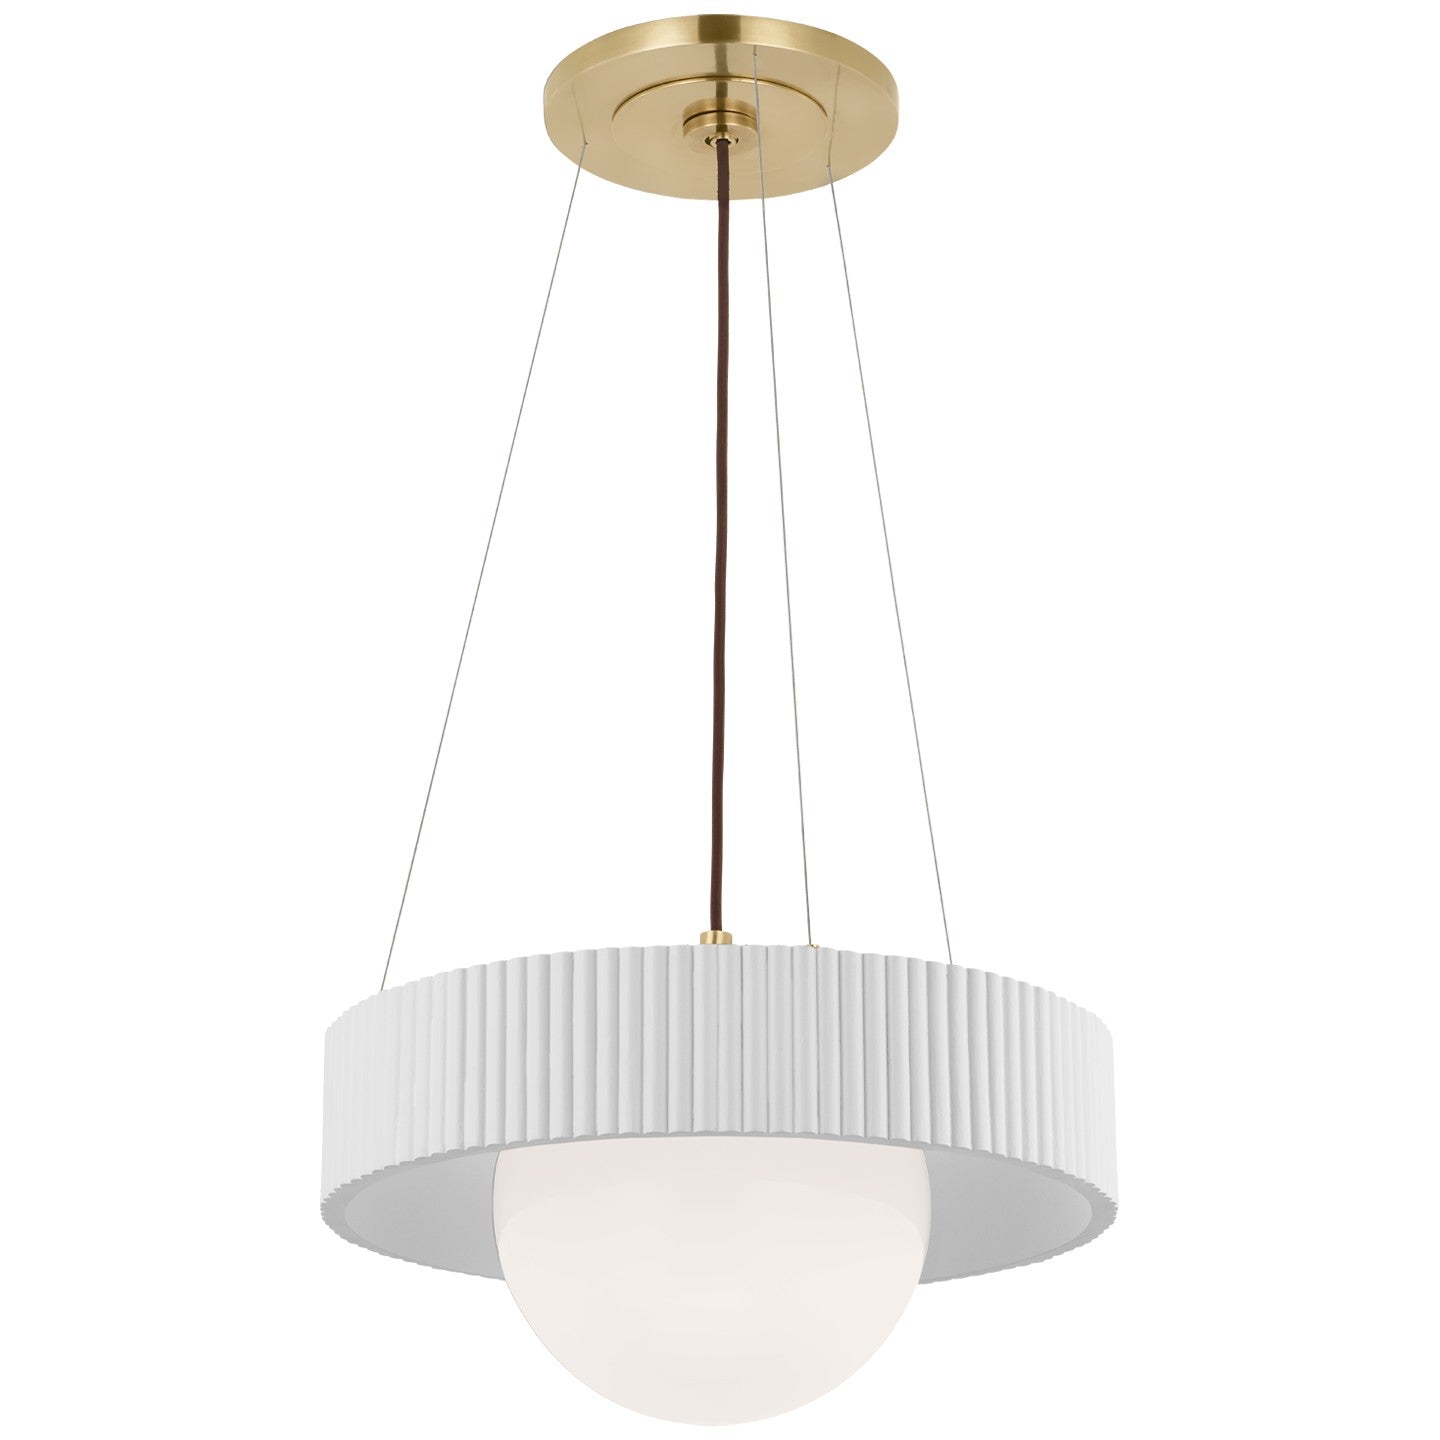 Visual Comfort Signature Canada - LED Chandelier - Arena - Hand-Rubbed Antique Brass and White Glass- Union Lighting Luminaires Decor